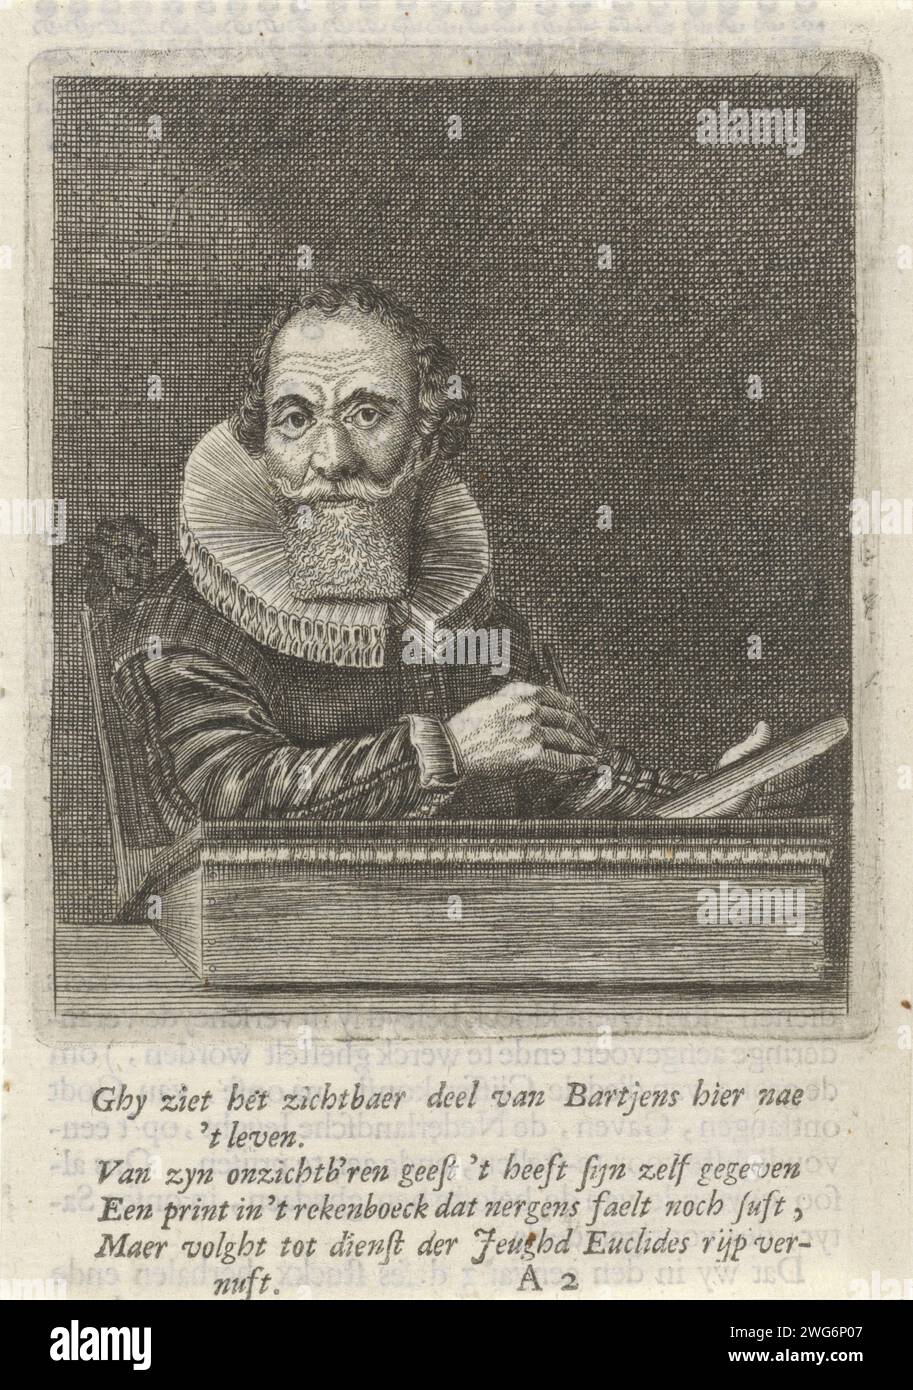 Portrait of the mathemer Willem Bartjens, Anonymous, After Salomon Savery, after Pieter Dubordieu, 1636 - 1715 print Print under the fresh marked: A 2. Amsterdam paper engraving / etching / letterpress printing Stock Photo